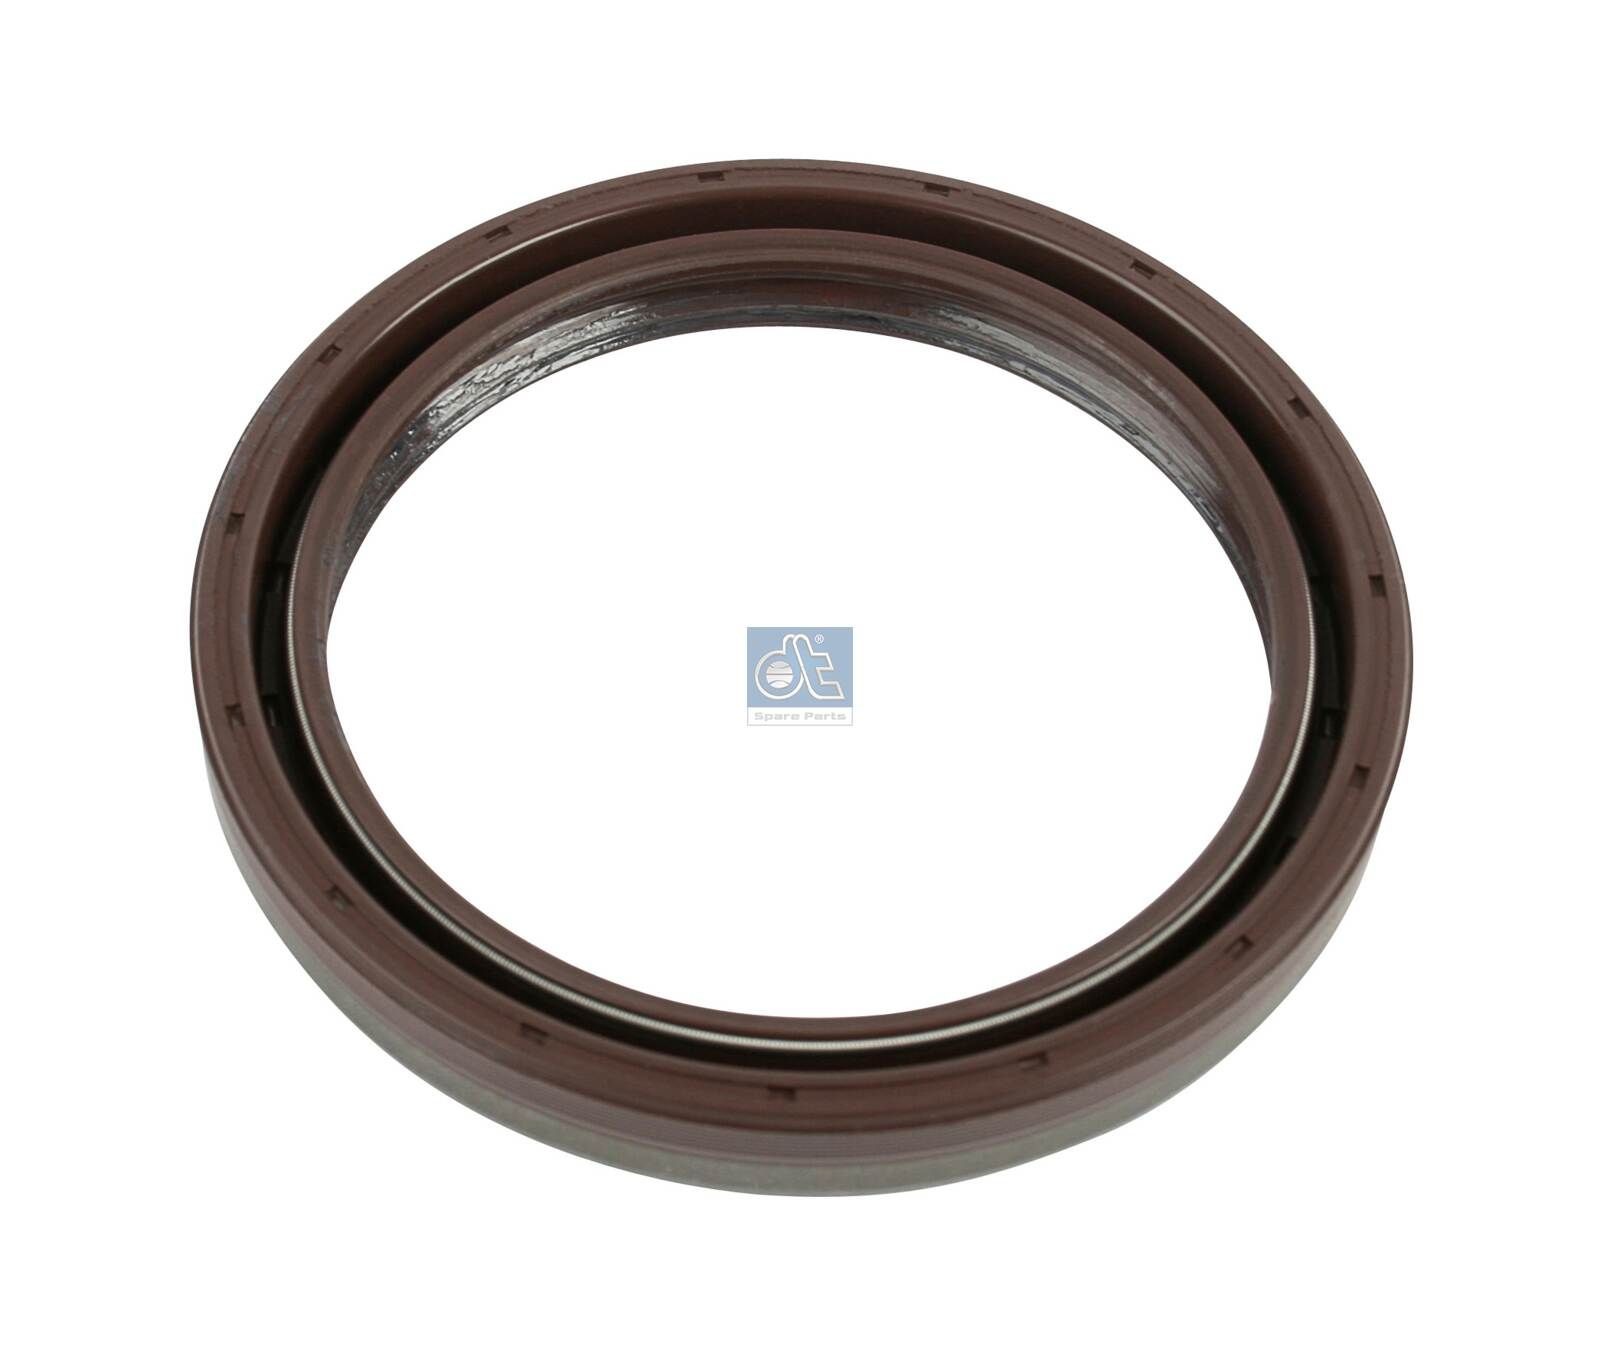 Lancia Shaft Seal, manual transmission DT Spare Parts 7.46201 at a good price